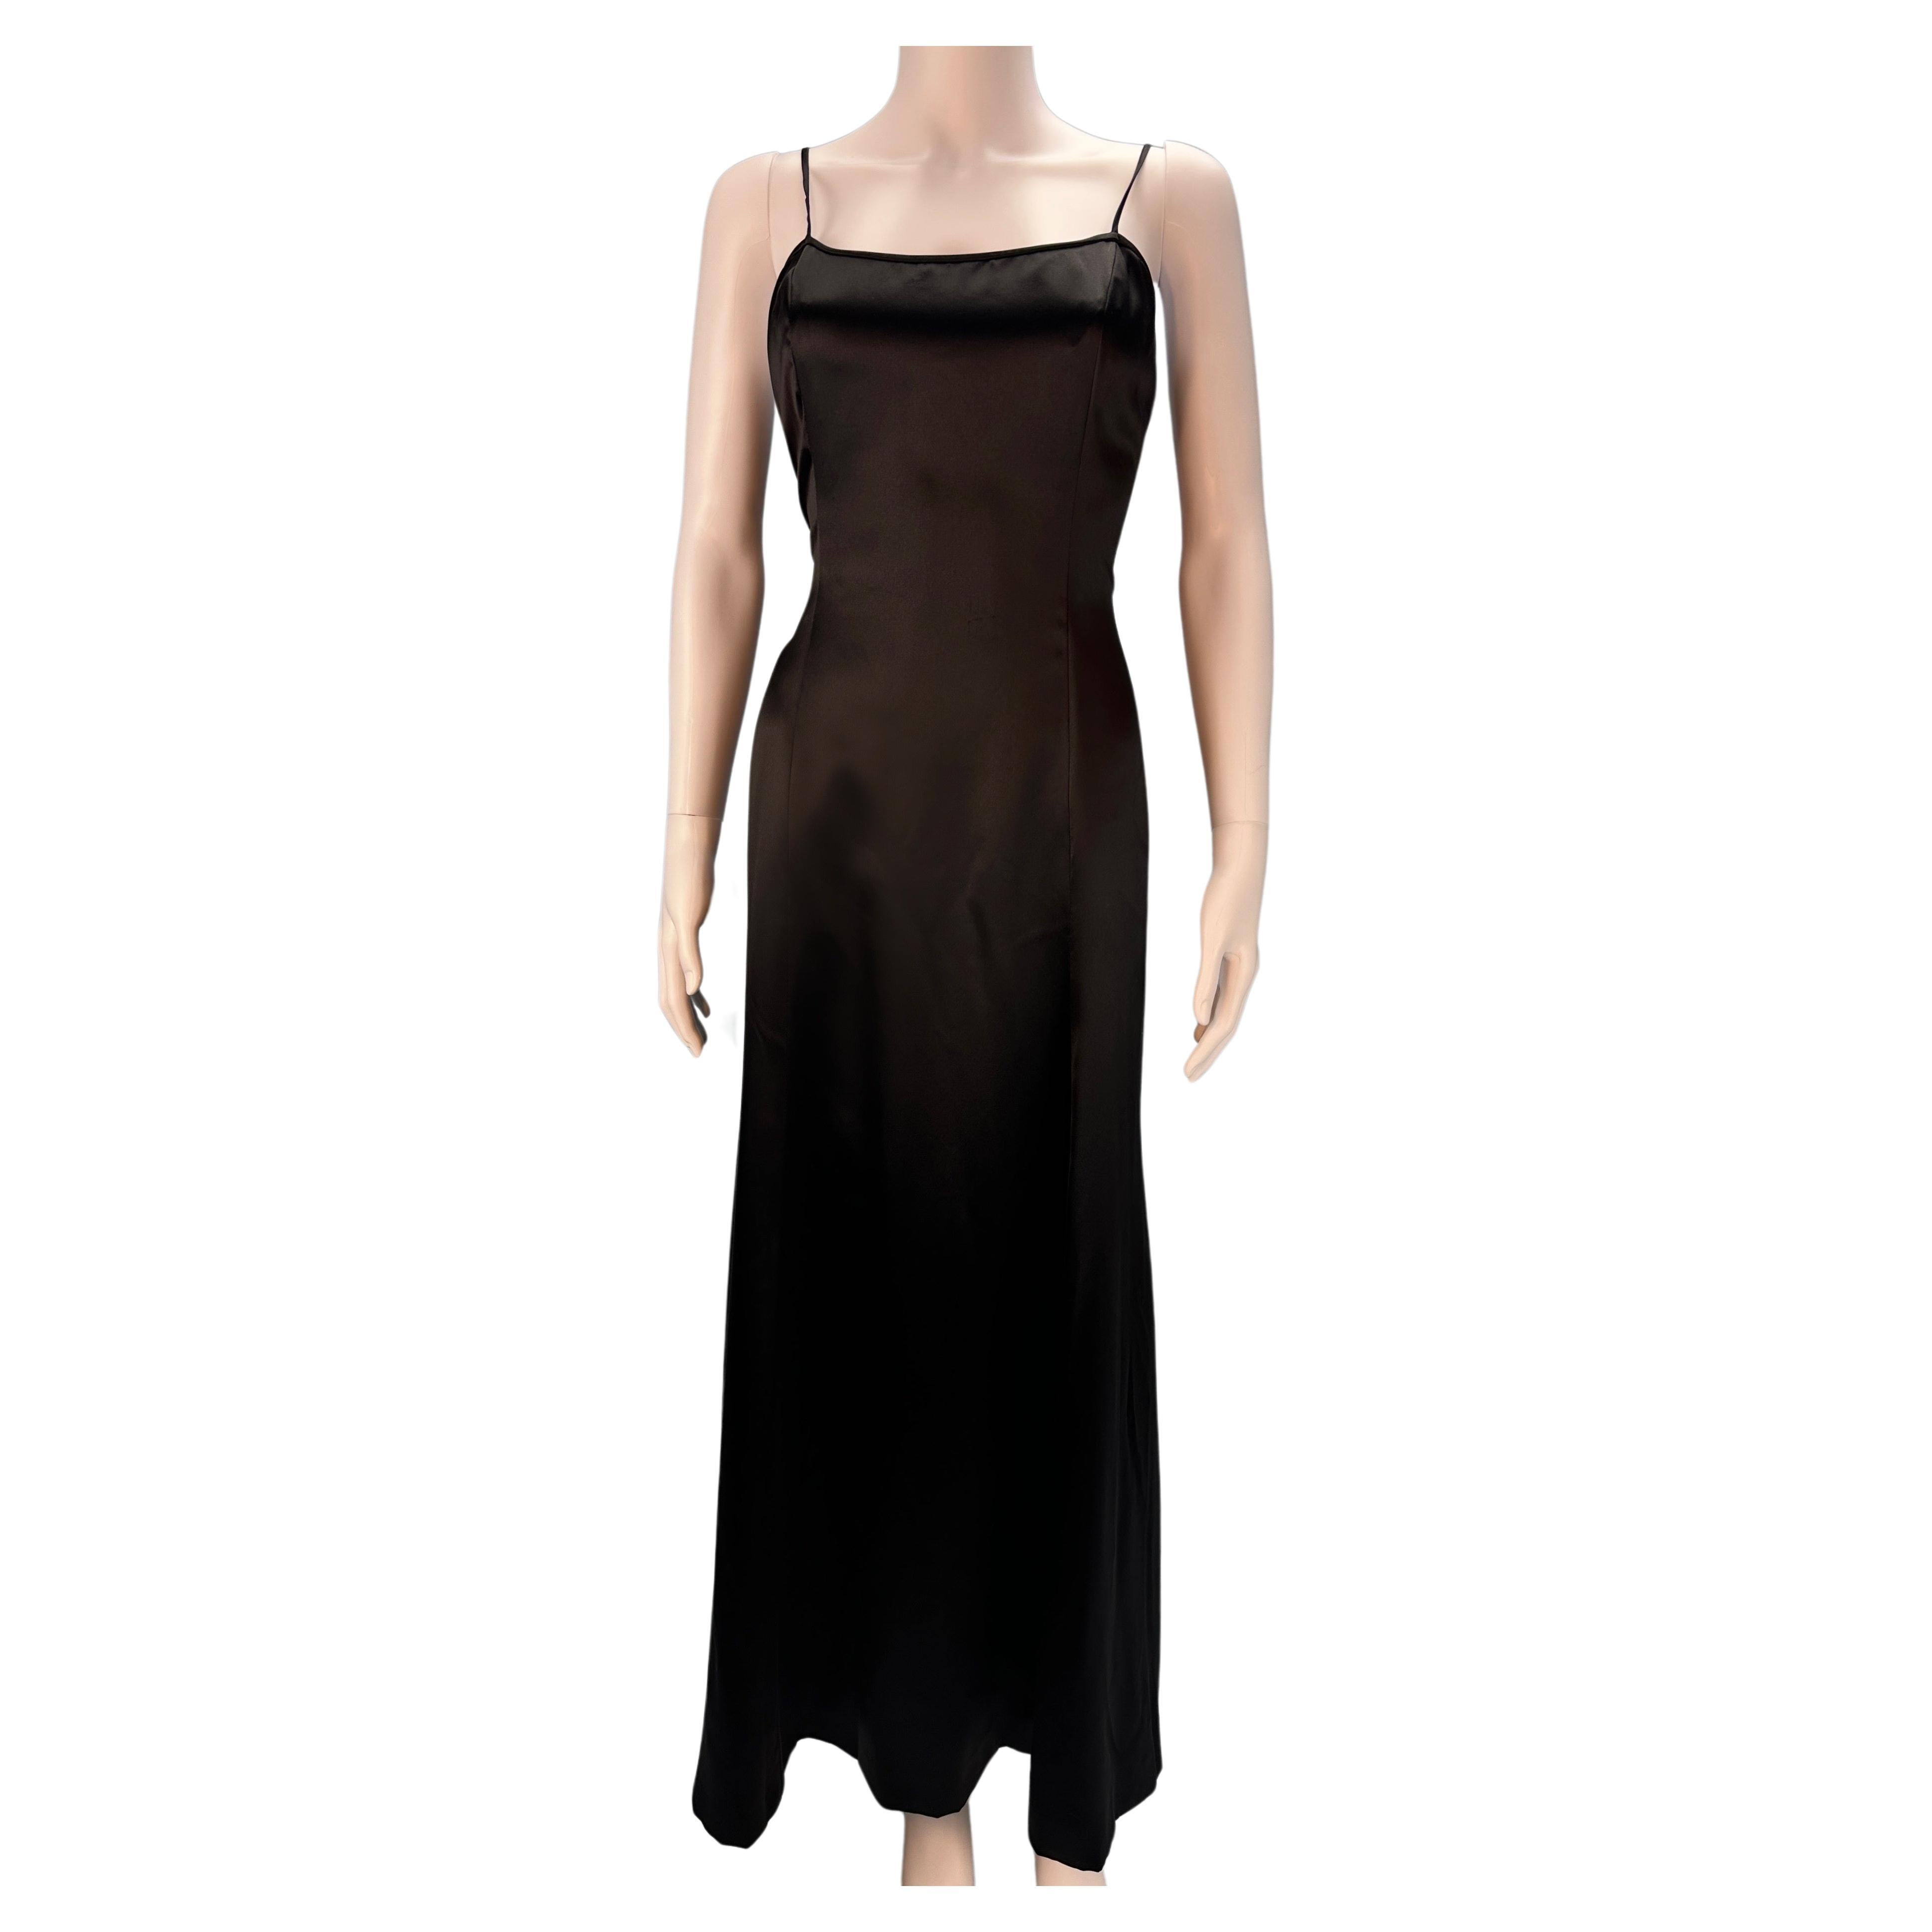 Chanel Fall 1995 Black Silk Satin Gown Dress For Sale